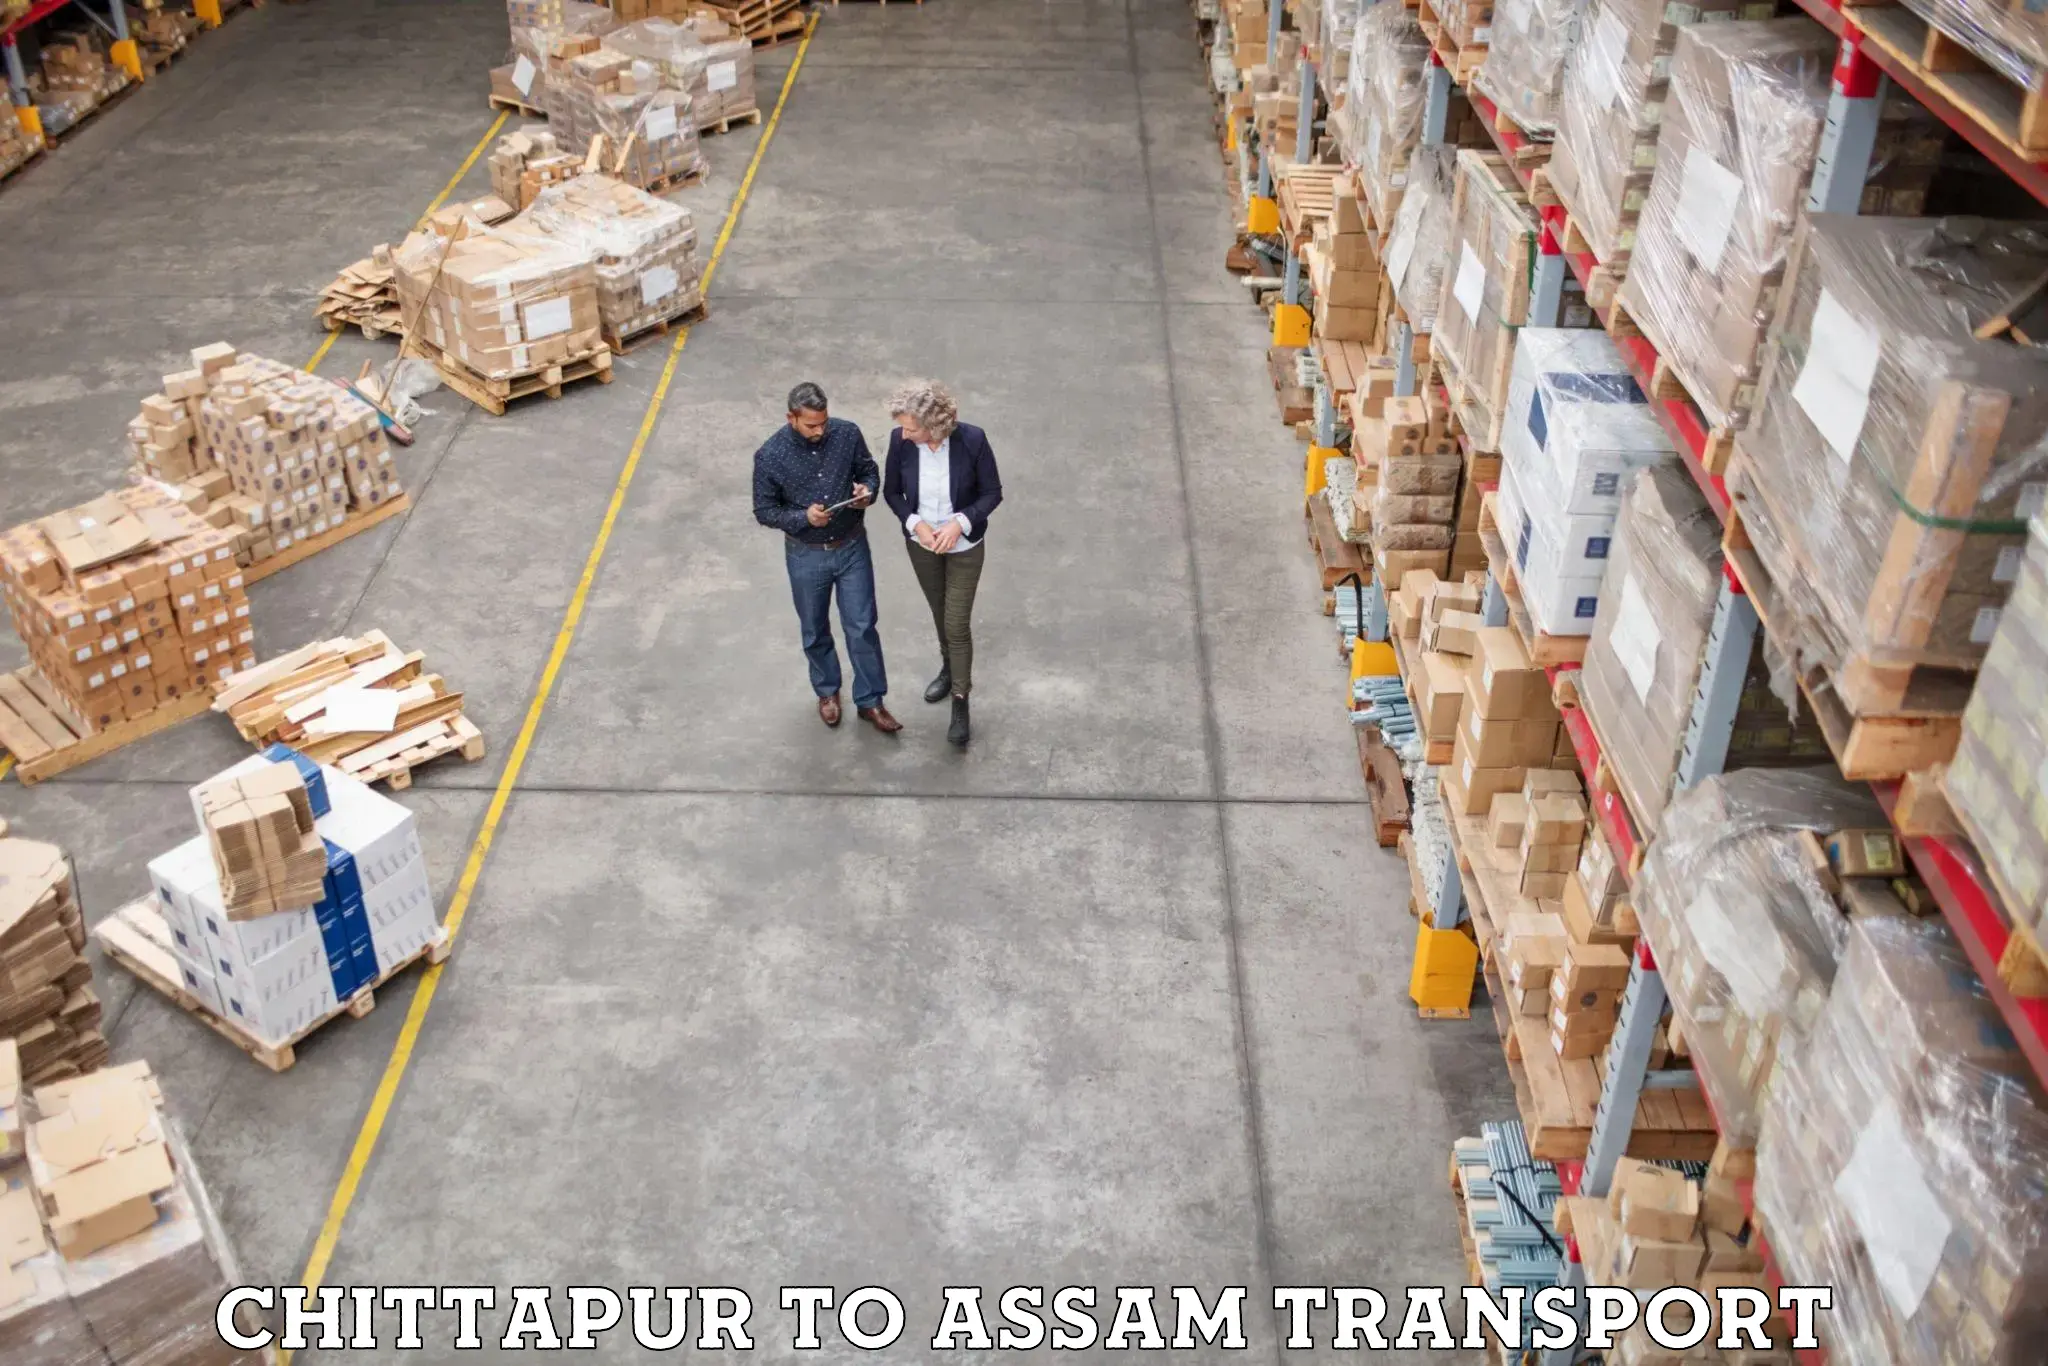 Daily parcel service transport Chittapur to Nagaon